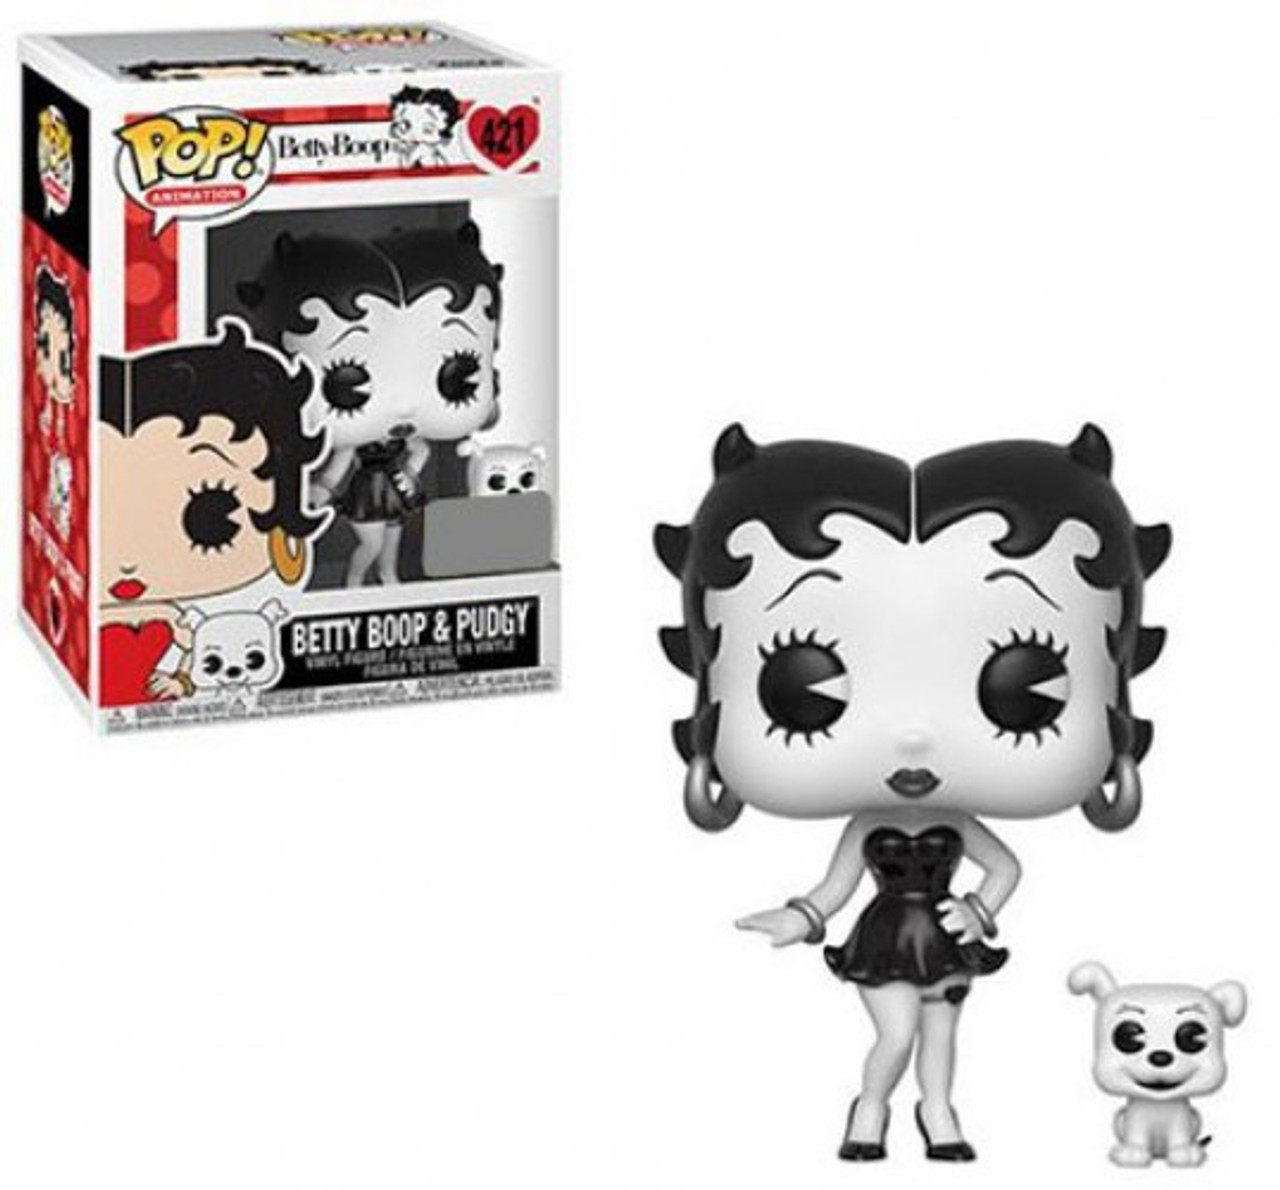 Funko Betty Boop Pop Animation Betty Boop Pudgy Exclusive Vinyl Figure 421 Black White Damaged Package Toywiz - frizzed security roblox